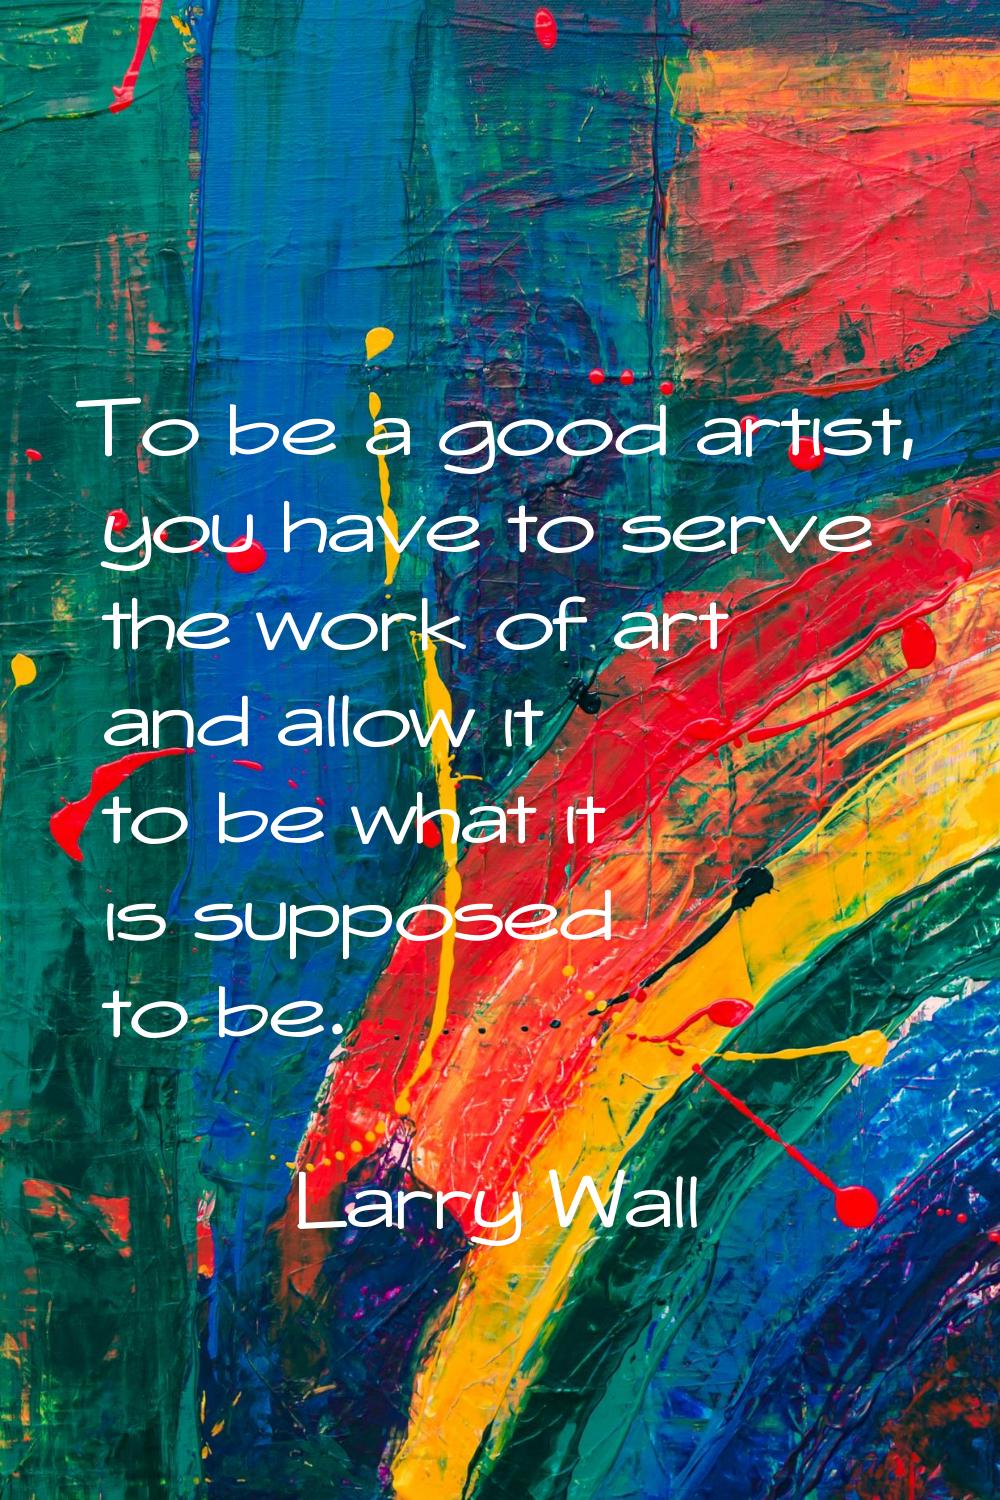 To be a good artist, you have to serve the work of art and allow it to be what it is supposed to be